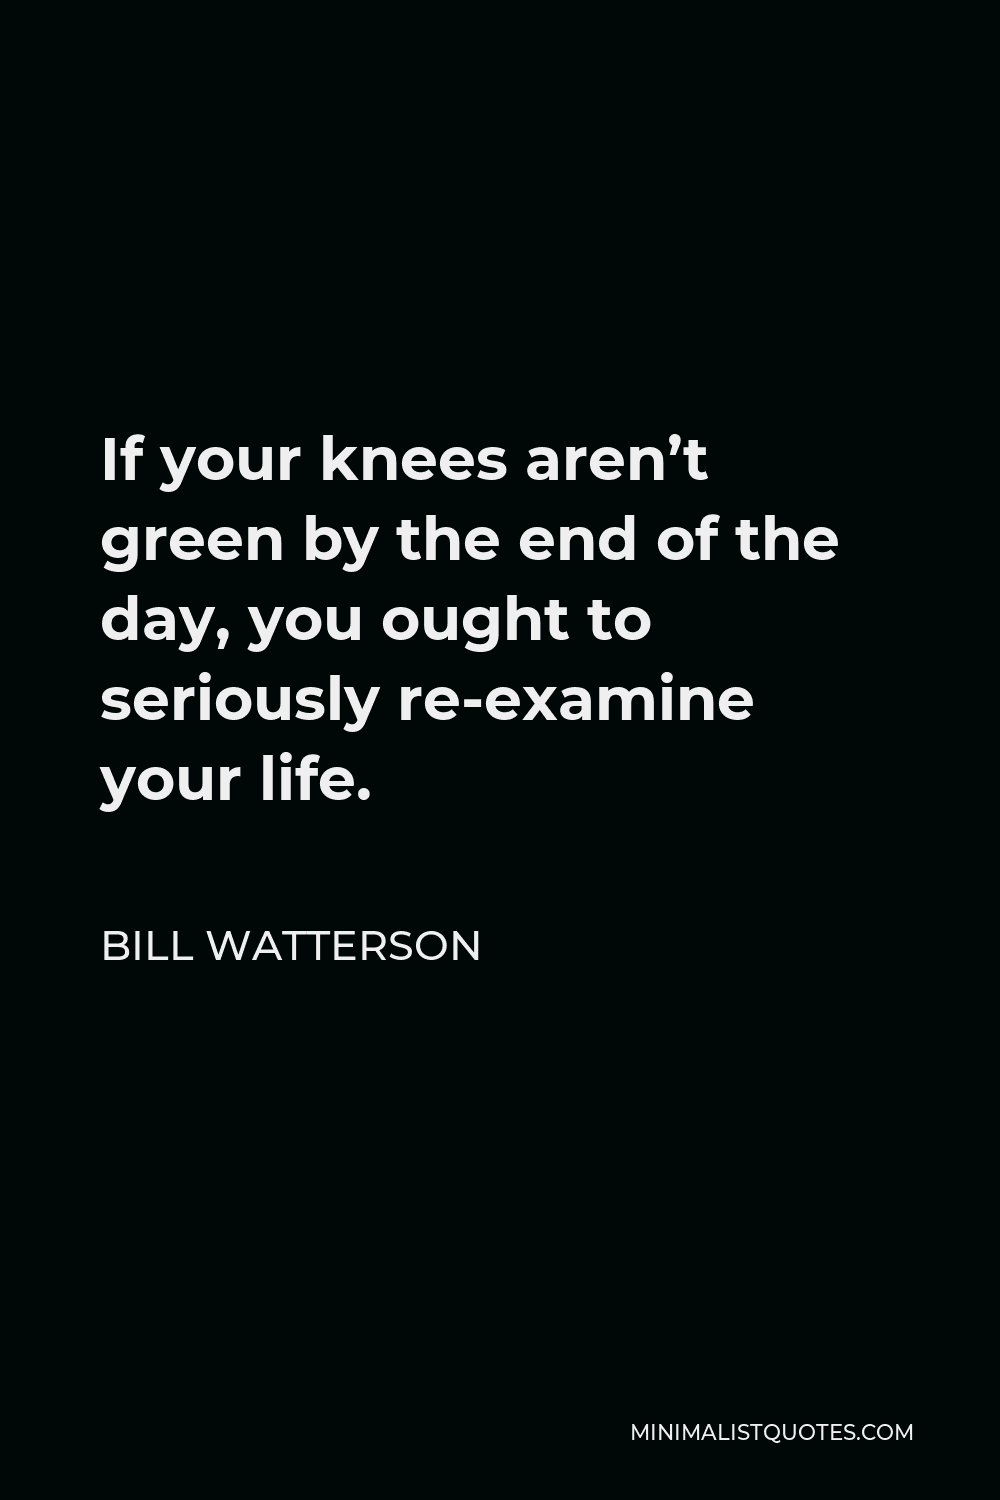 Bill Watterson Quote - If your knees aren’t green by the end of the day, you ought to seriously re-examine your life.